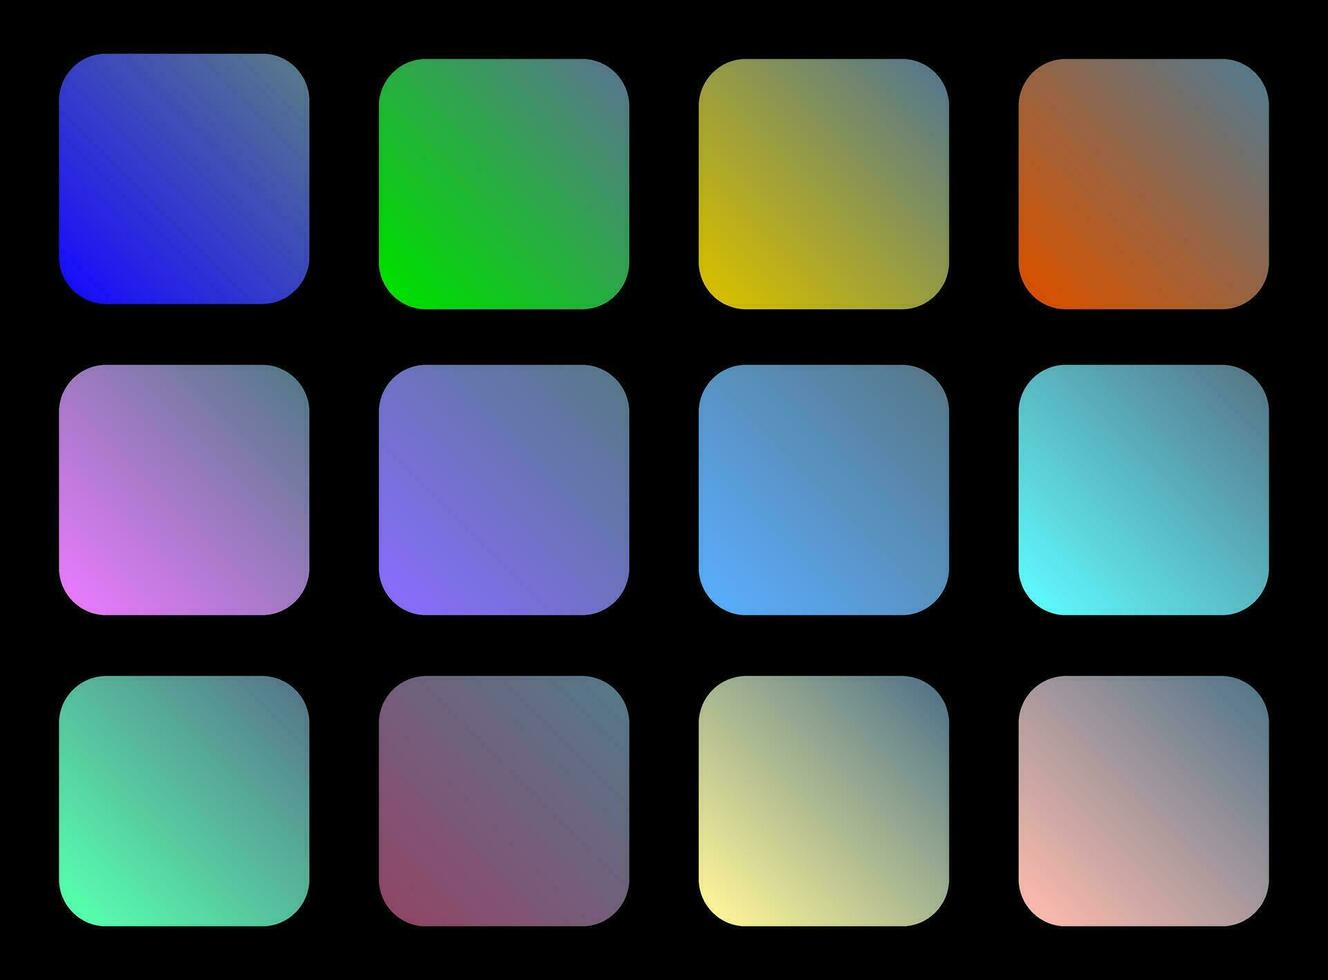 Colorful Stone Color Shade Linear Gradient Palette Swatches Web Kit Rounded Squares Template Set vector